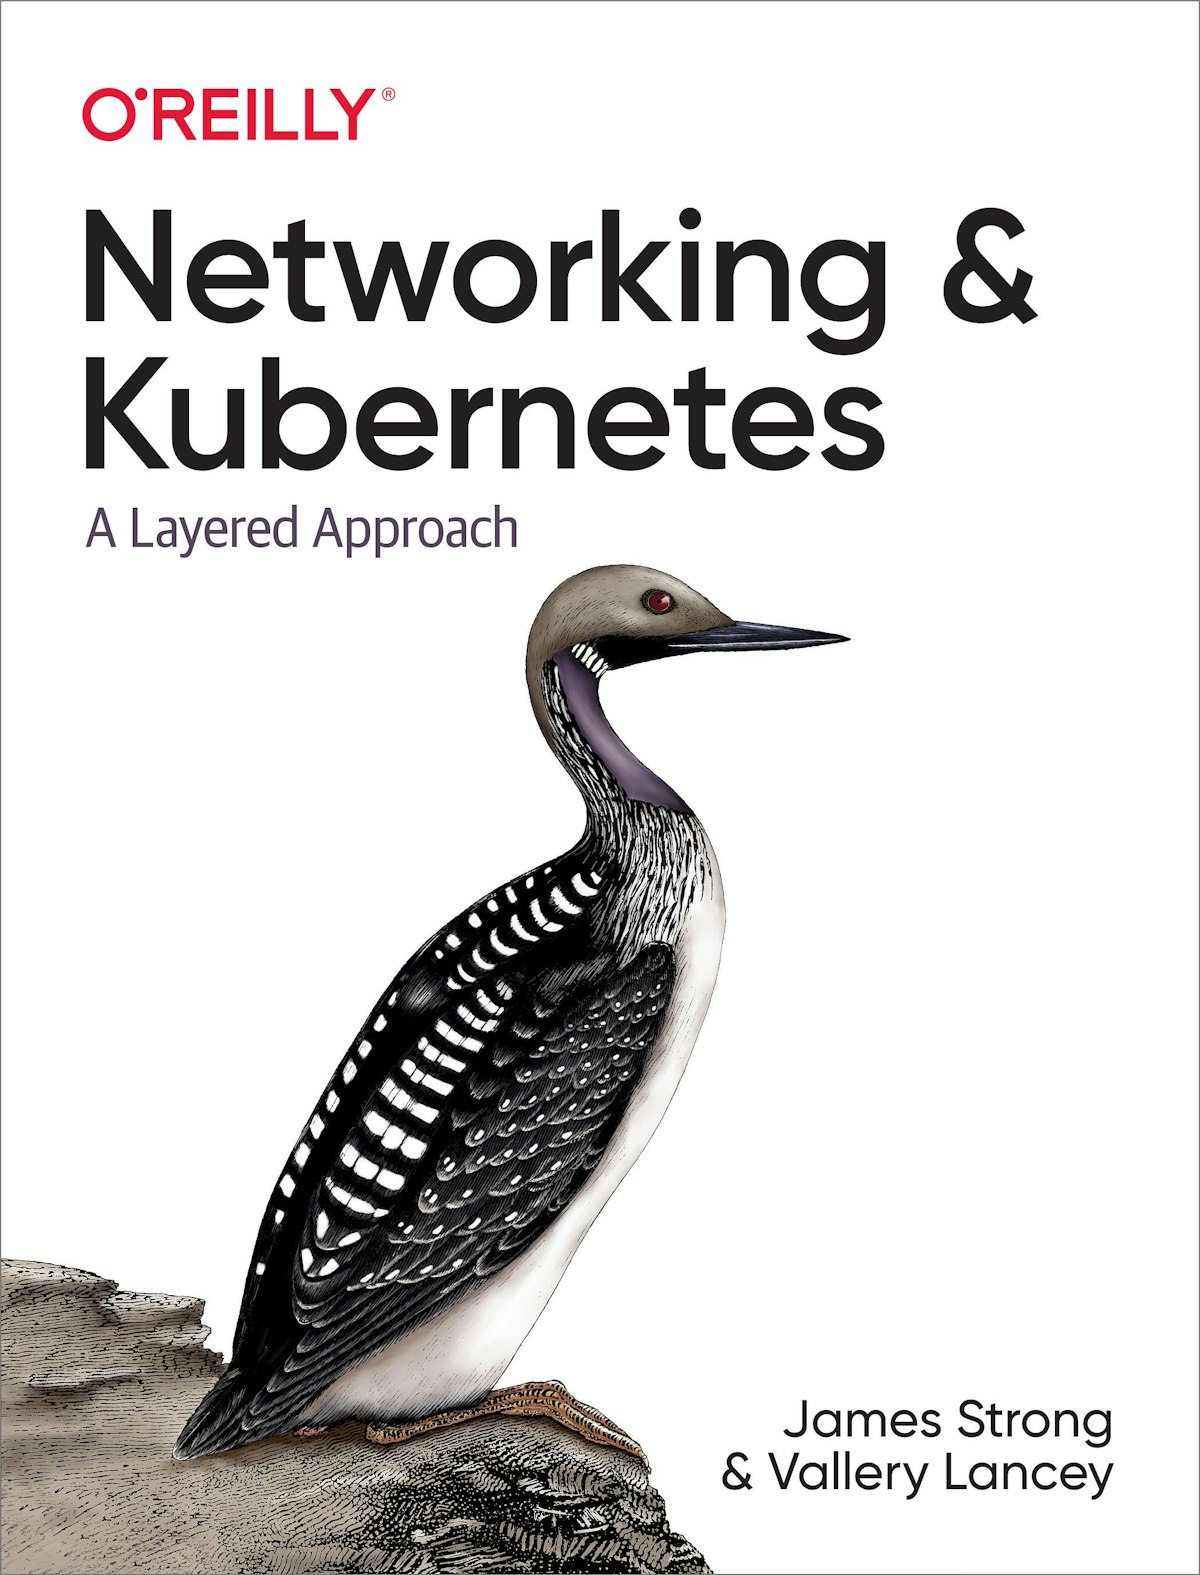 featured image - Networking & Kubernetes: Book Review and Interview with Author James Strong